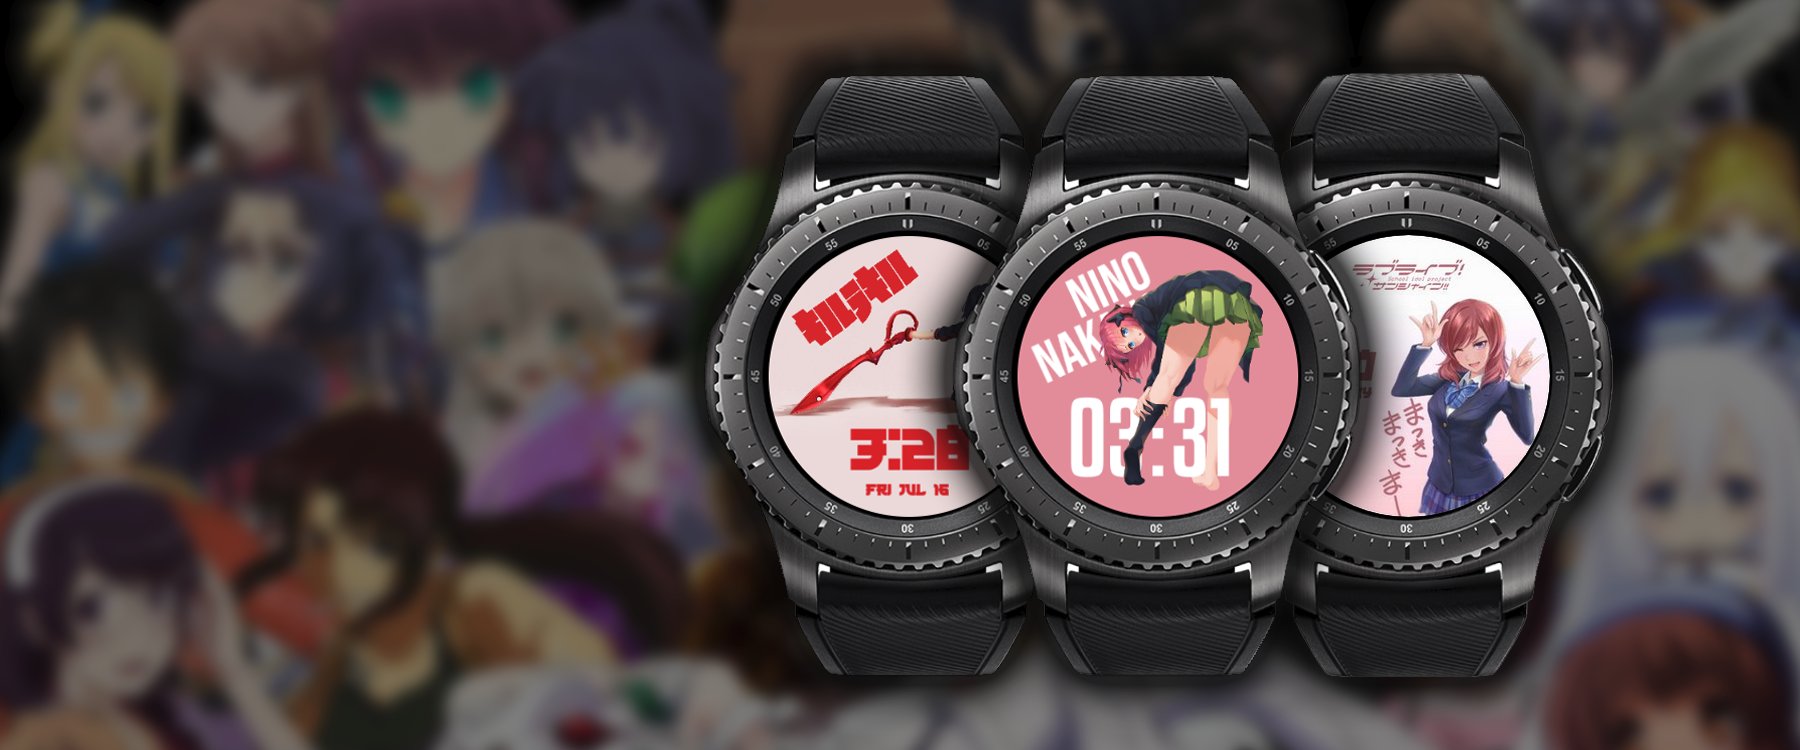 Anime (Digital) - Watch Faces For Apple Watch, Samsung Gear S3, Huawei